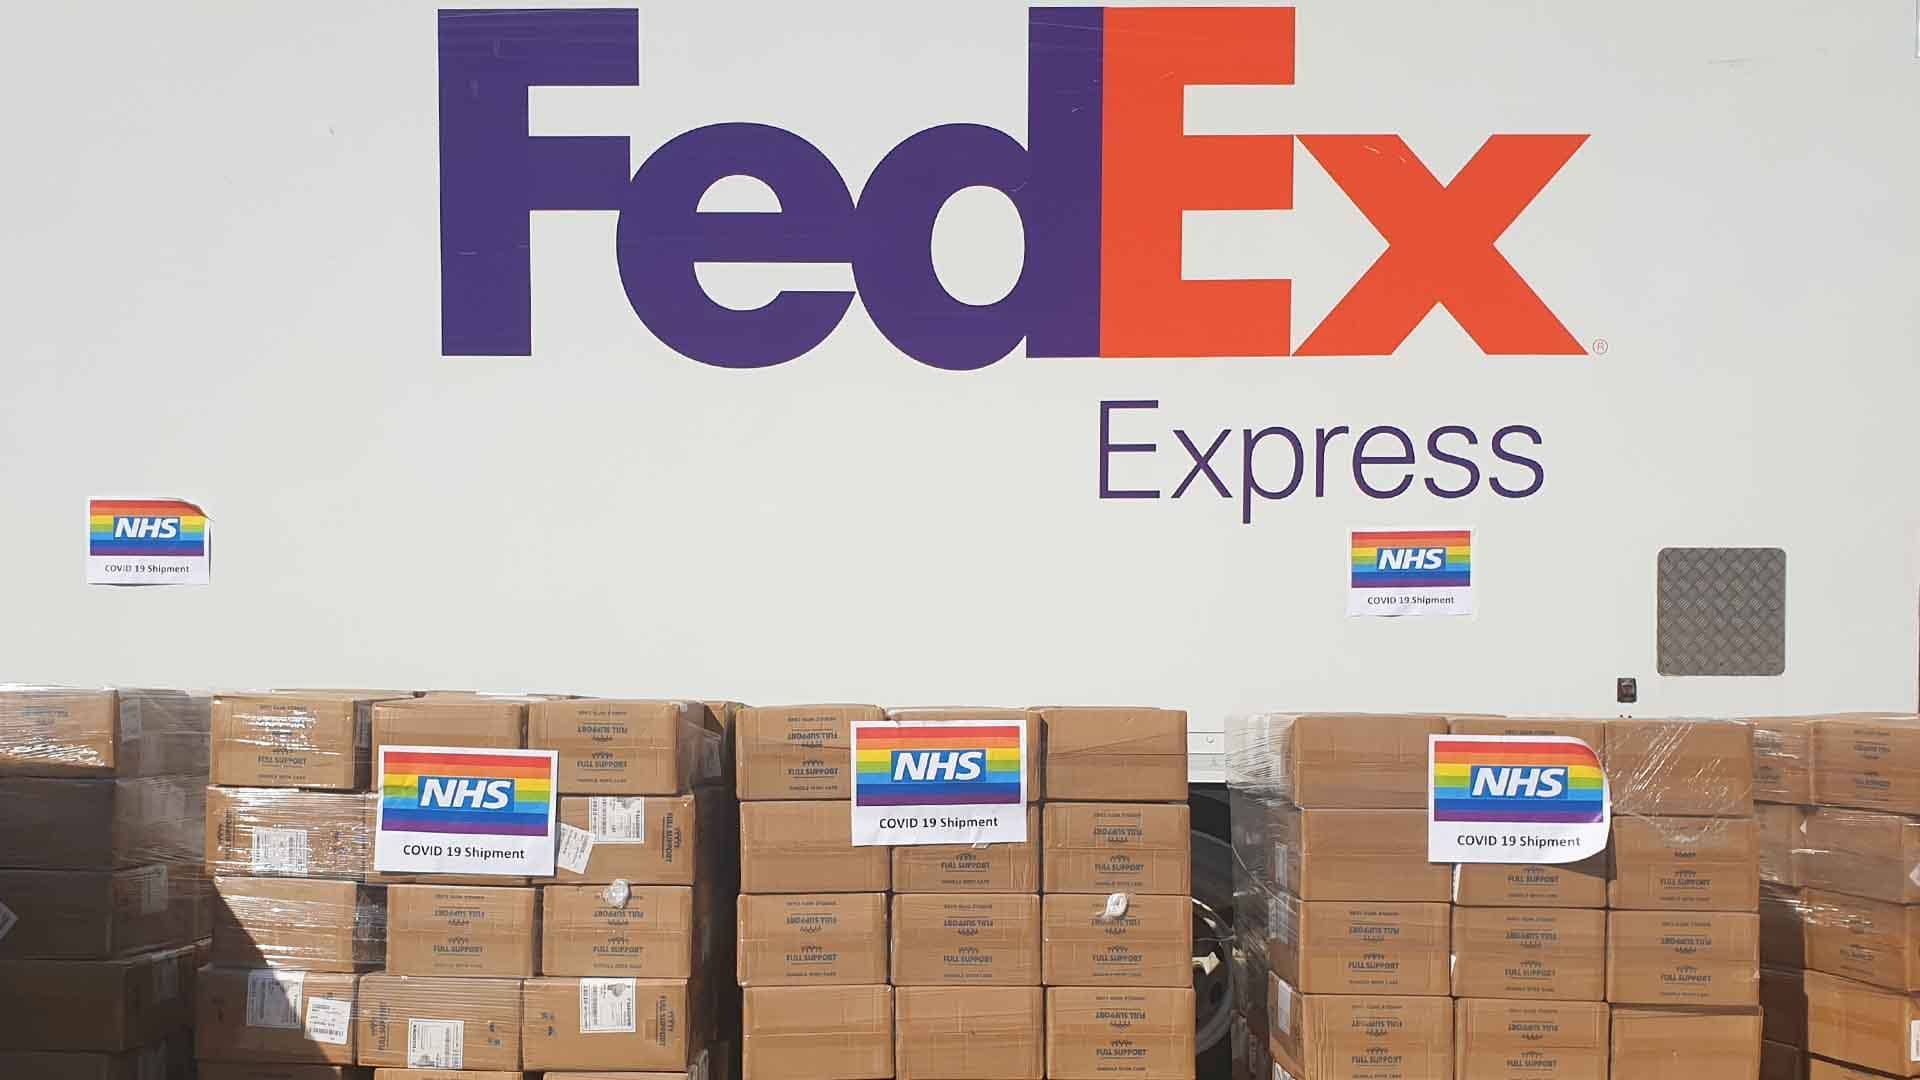 During the COVID-19 pandemic, FedEx is providing support to countries across the globe.